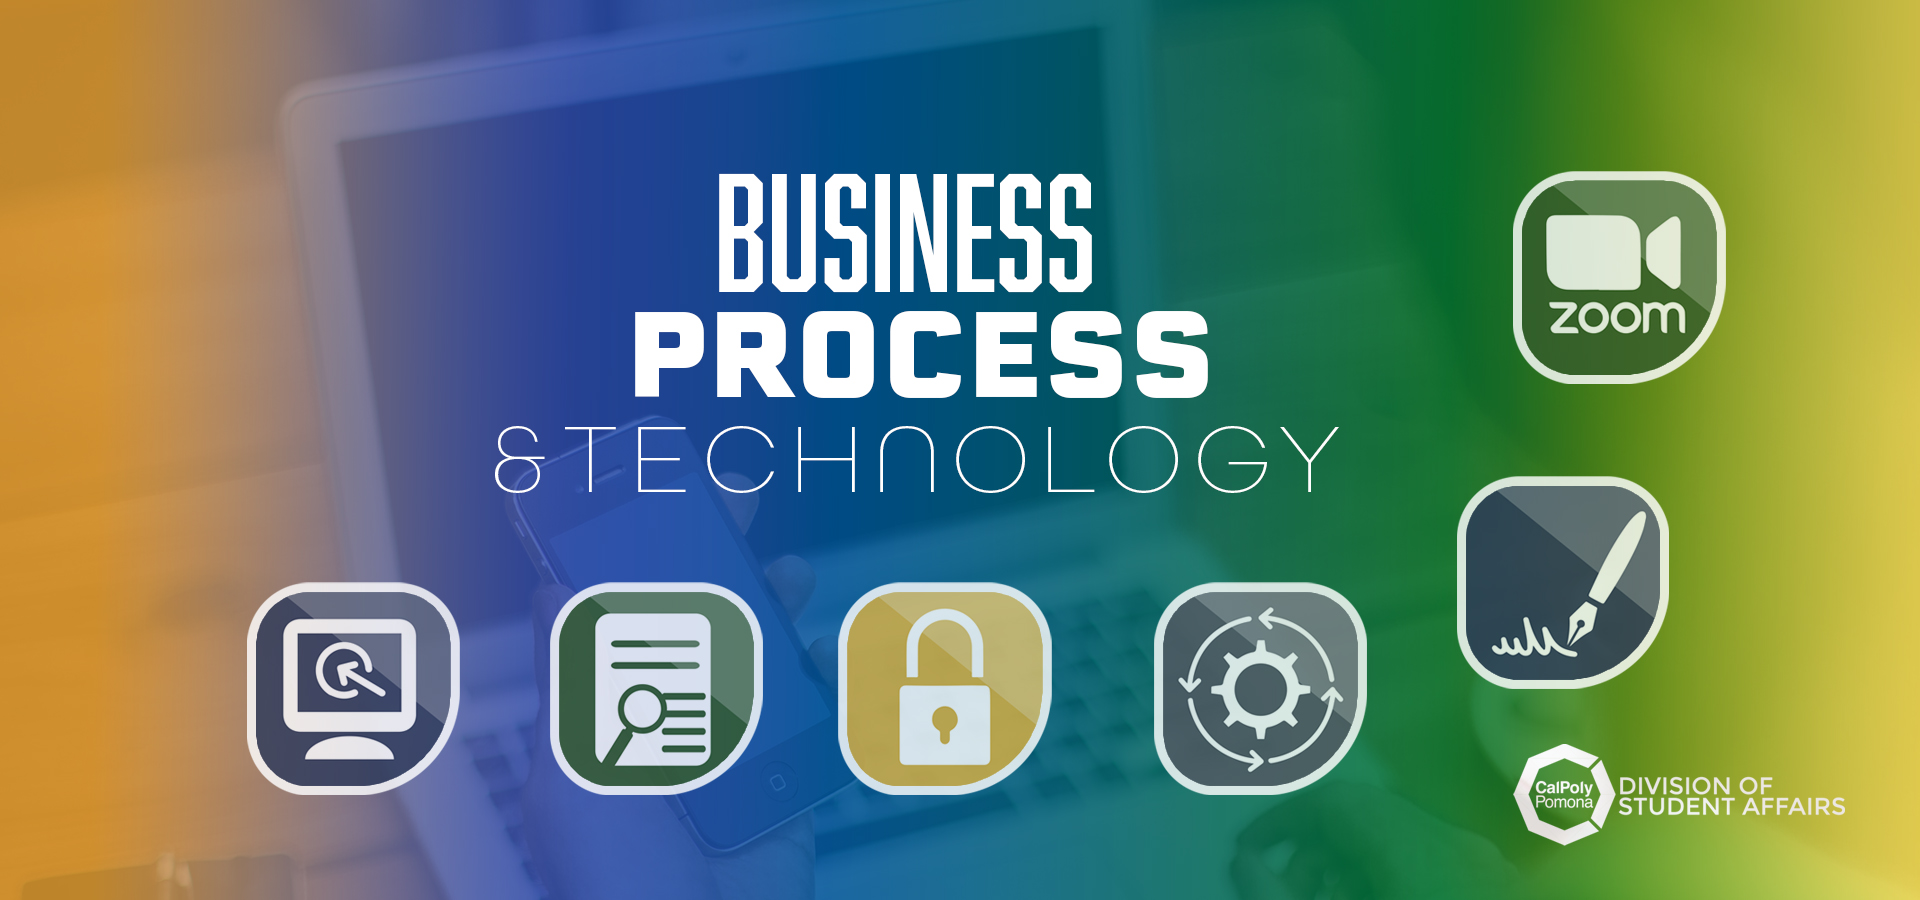 Business process technology banner with technology icons and computer photo